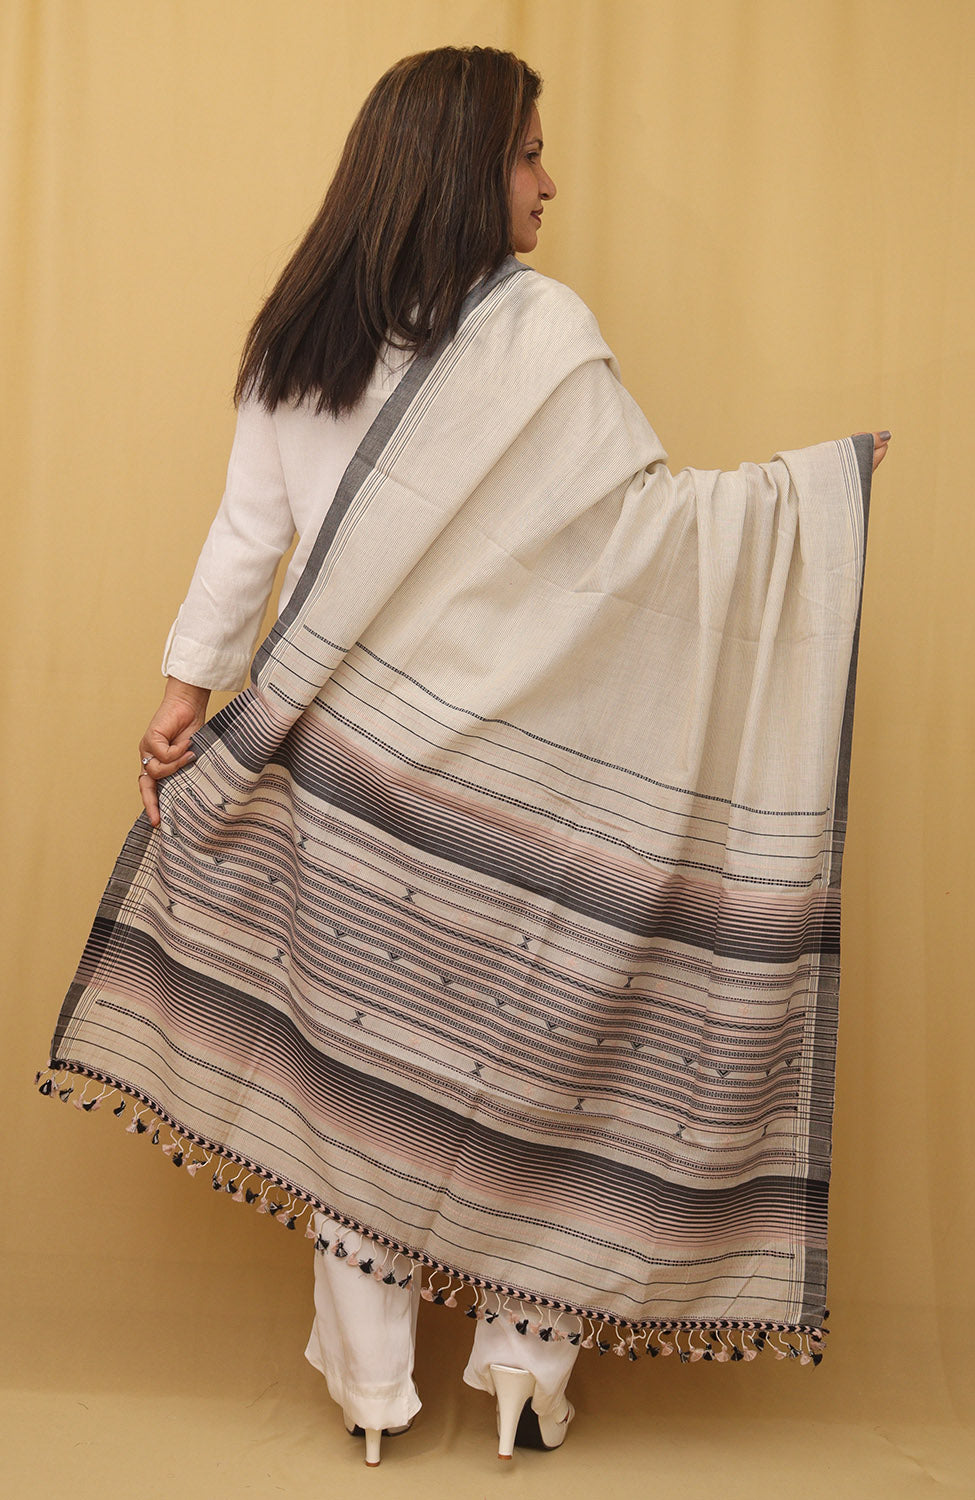 Handcrafted Pastel Bhujodi Cotton Dupatta with Intricate Embroidery - Luxurion World